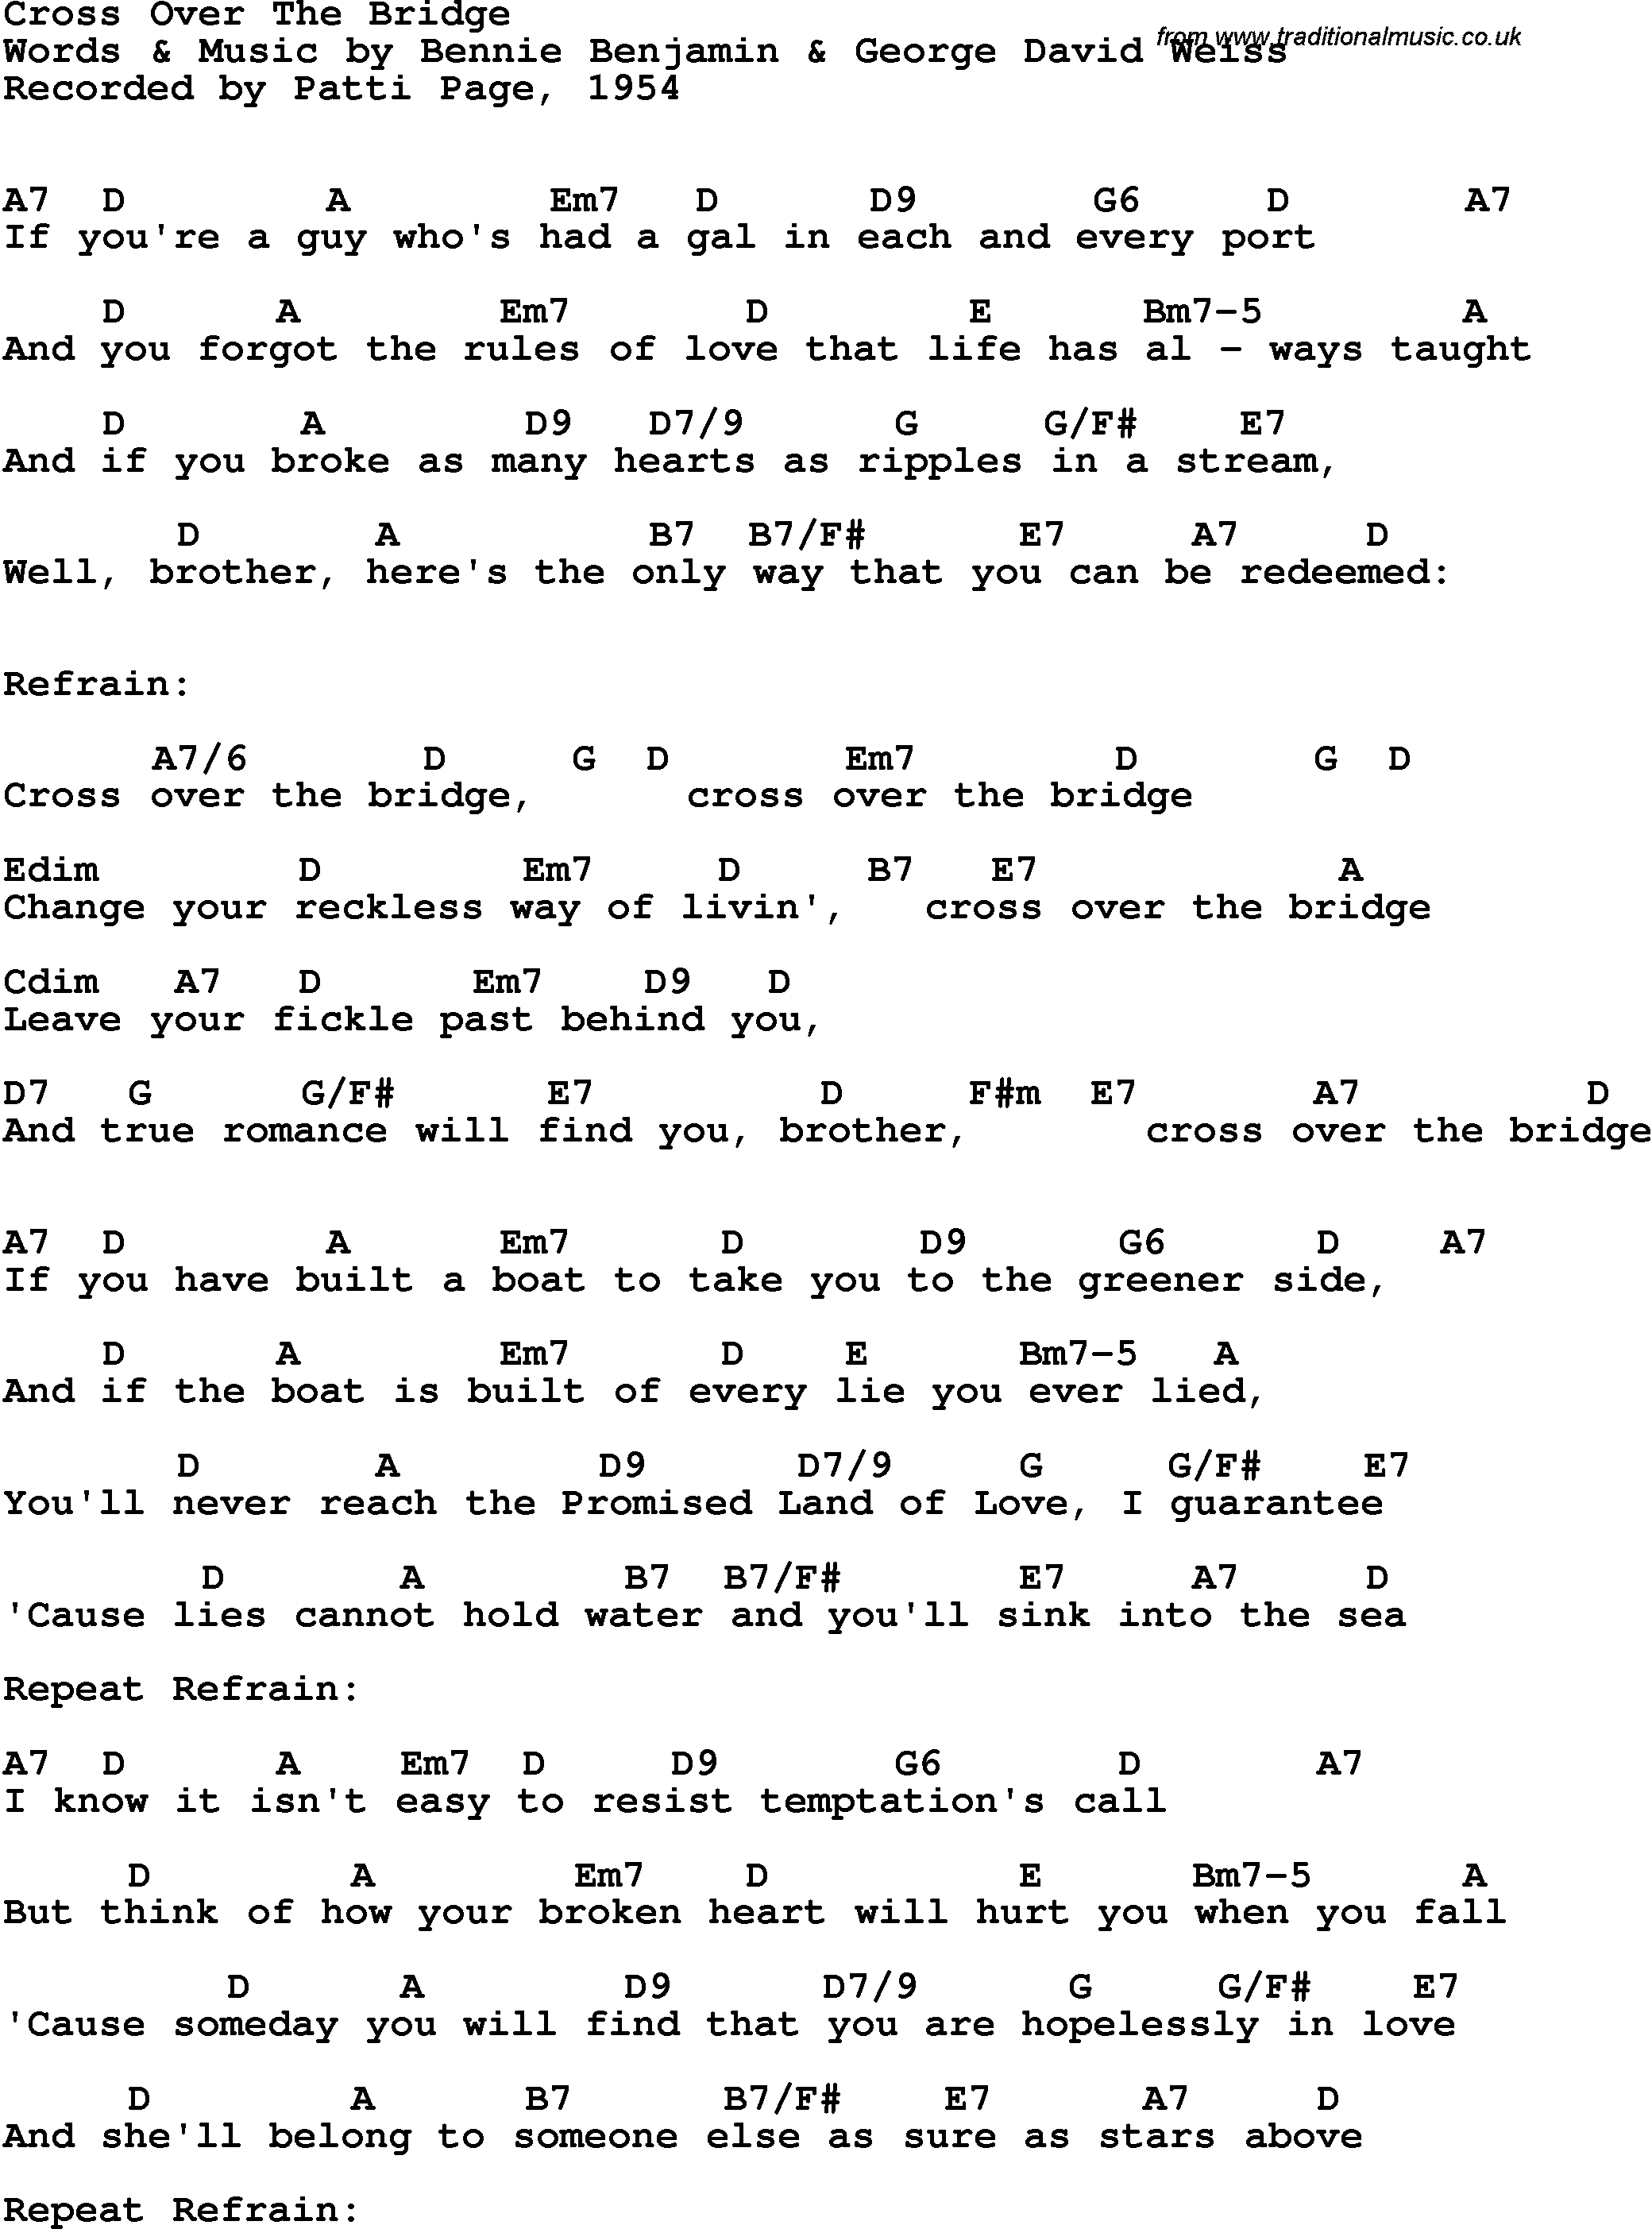 Song Lyrics with guitar chords for Cross Over The Bridge - Patti Page, 1954